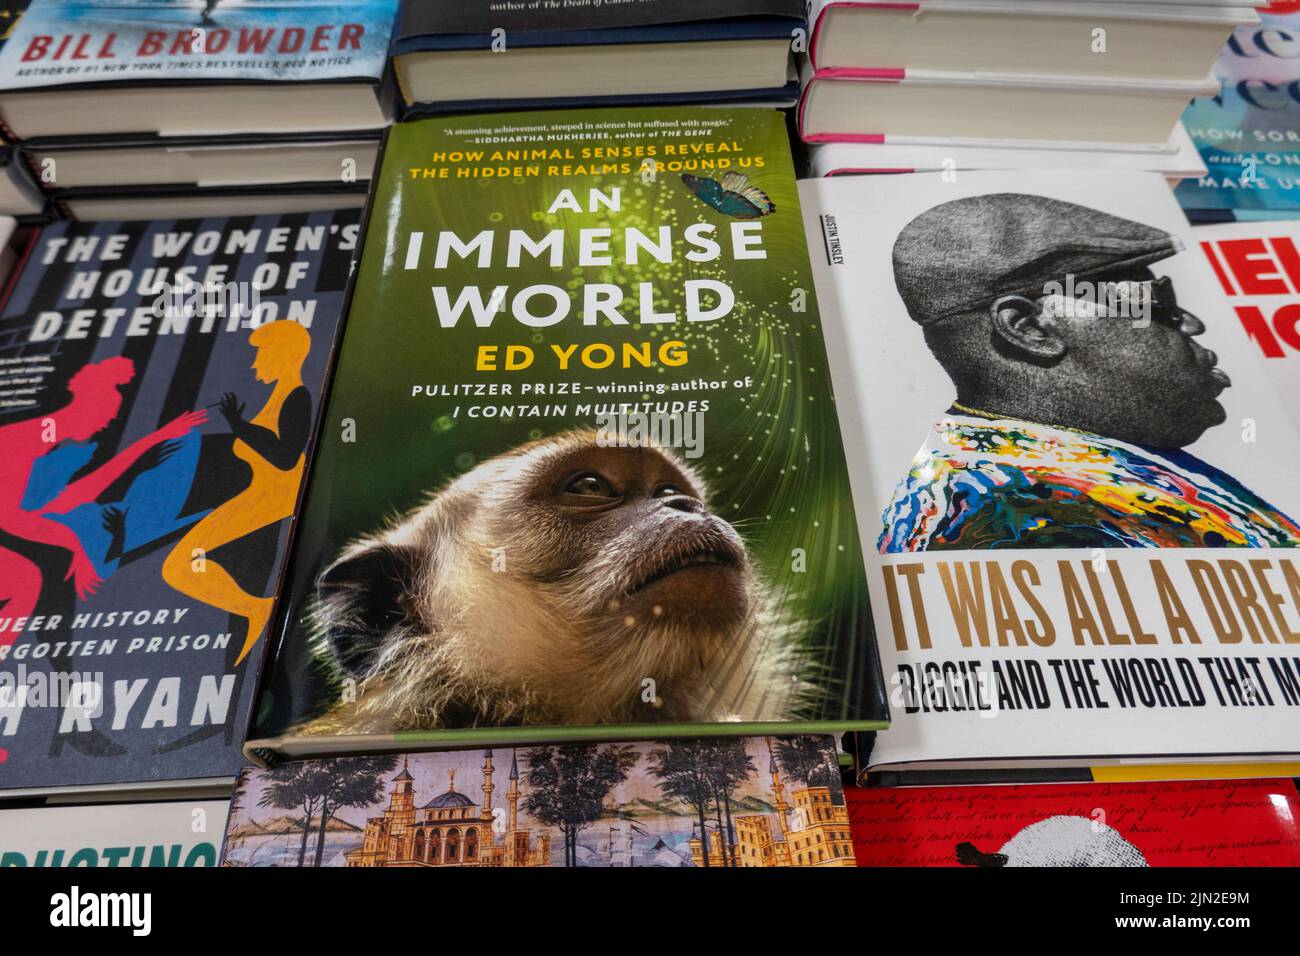 Barnes & Noble Booksellers on Fifth Avenue in New York City has a large selection of books, USA  2022 Stock Photo